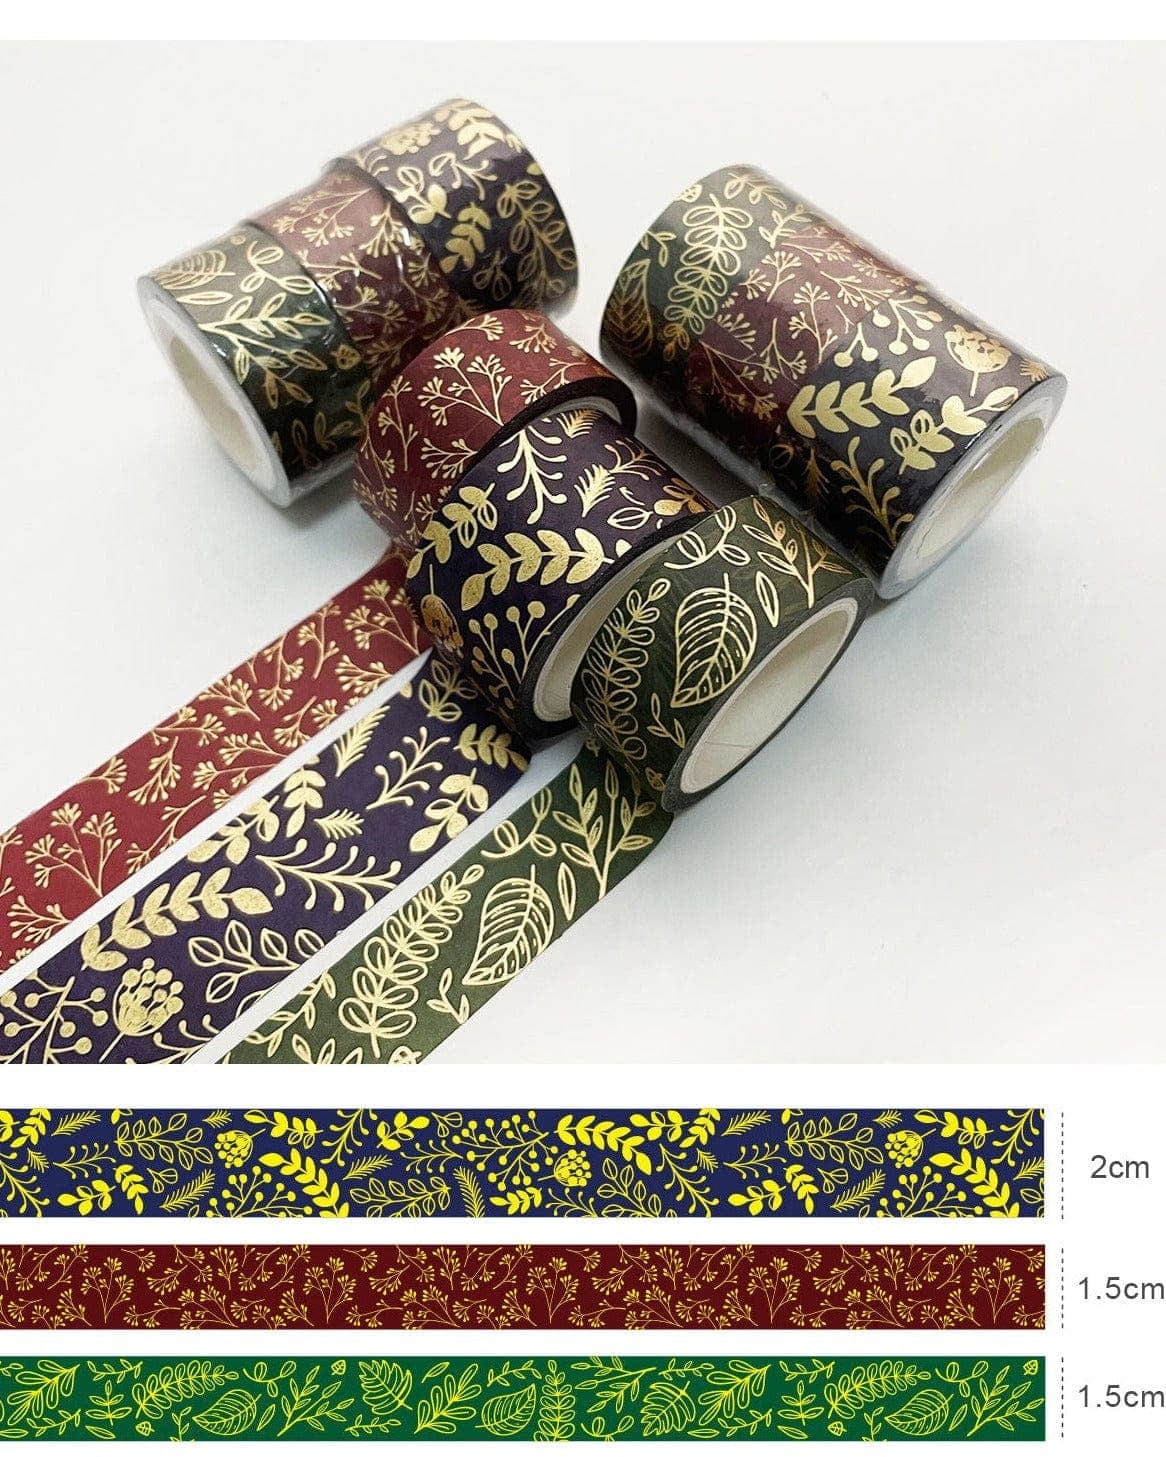 KUMA Stationery & Crafts  Stationery Gold Foil Washi Tape Collection: 8 sets to choose from